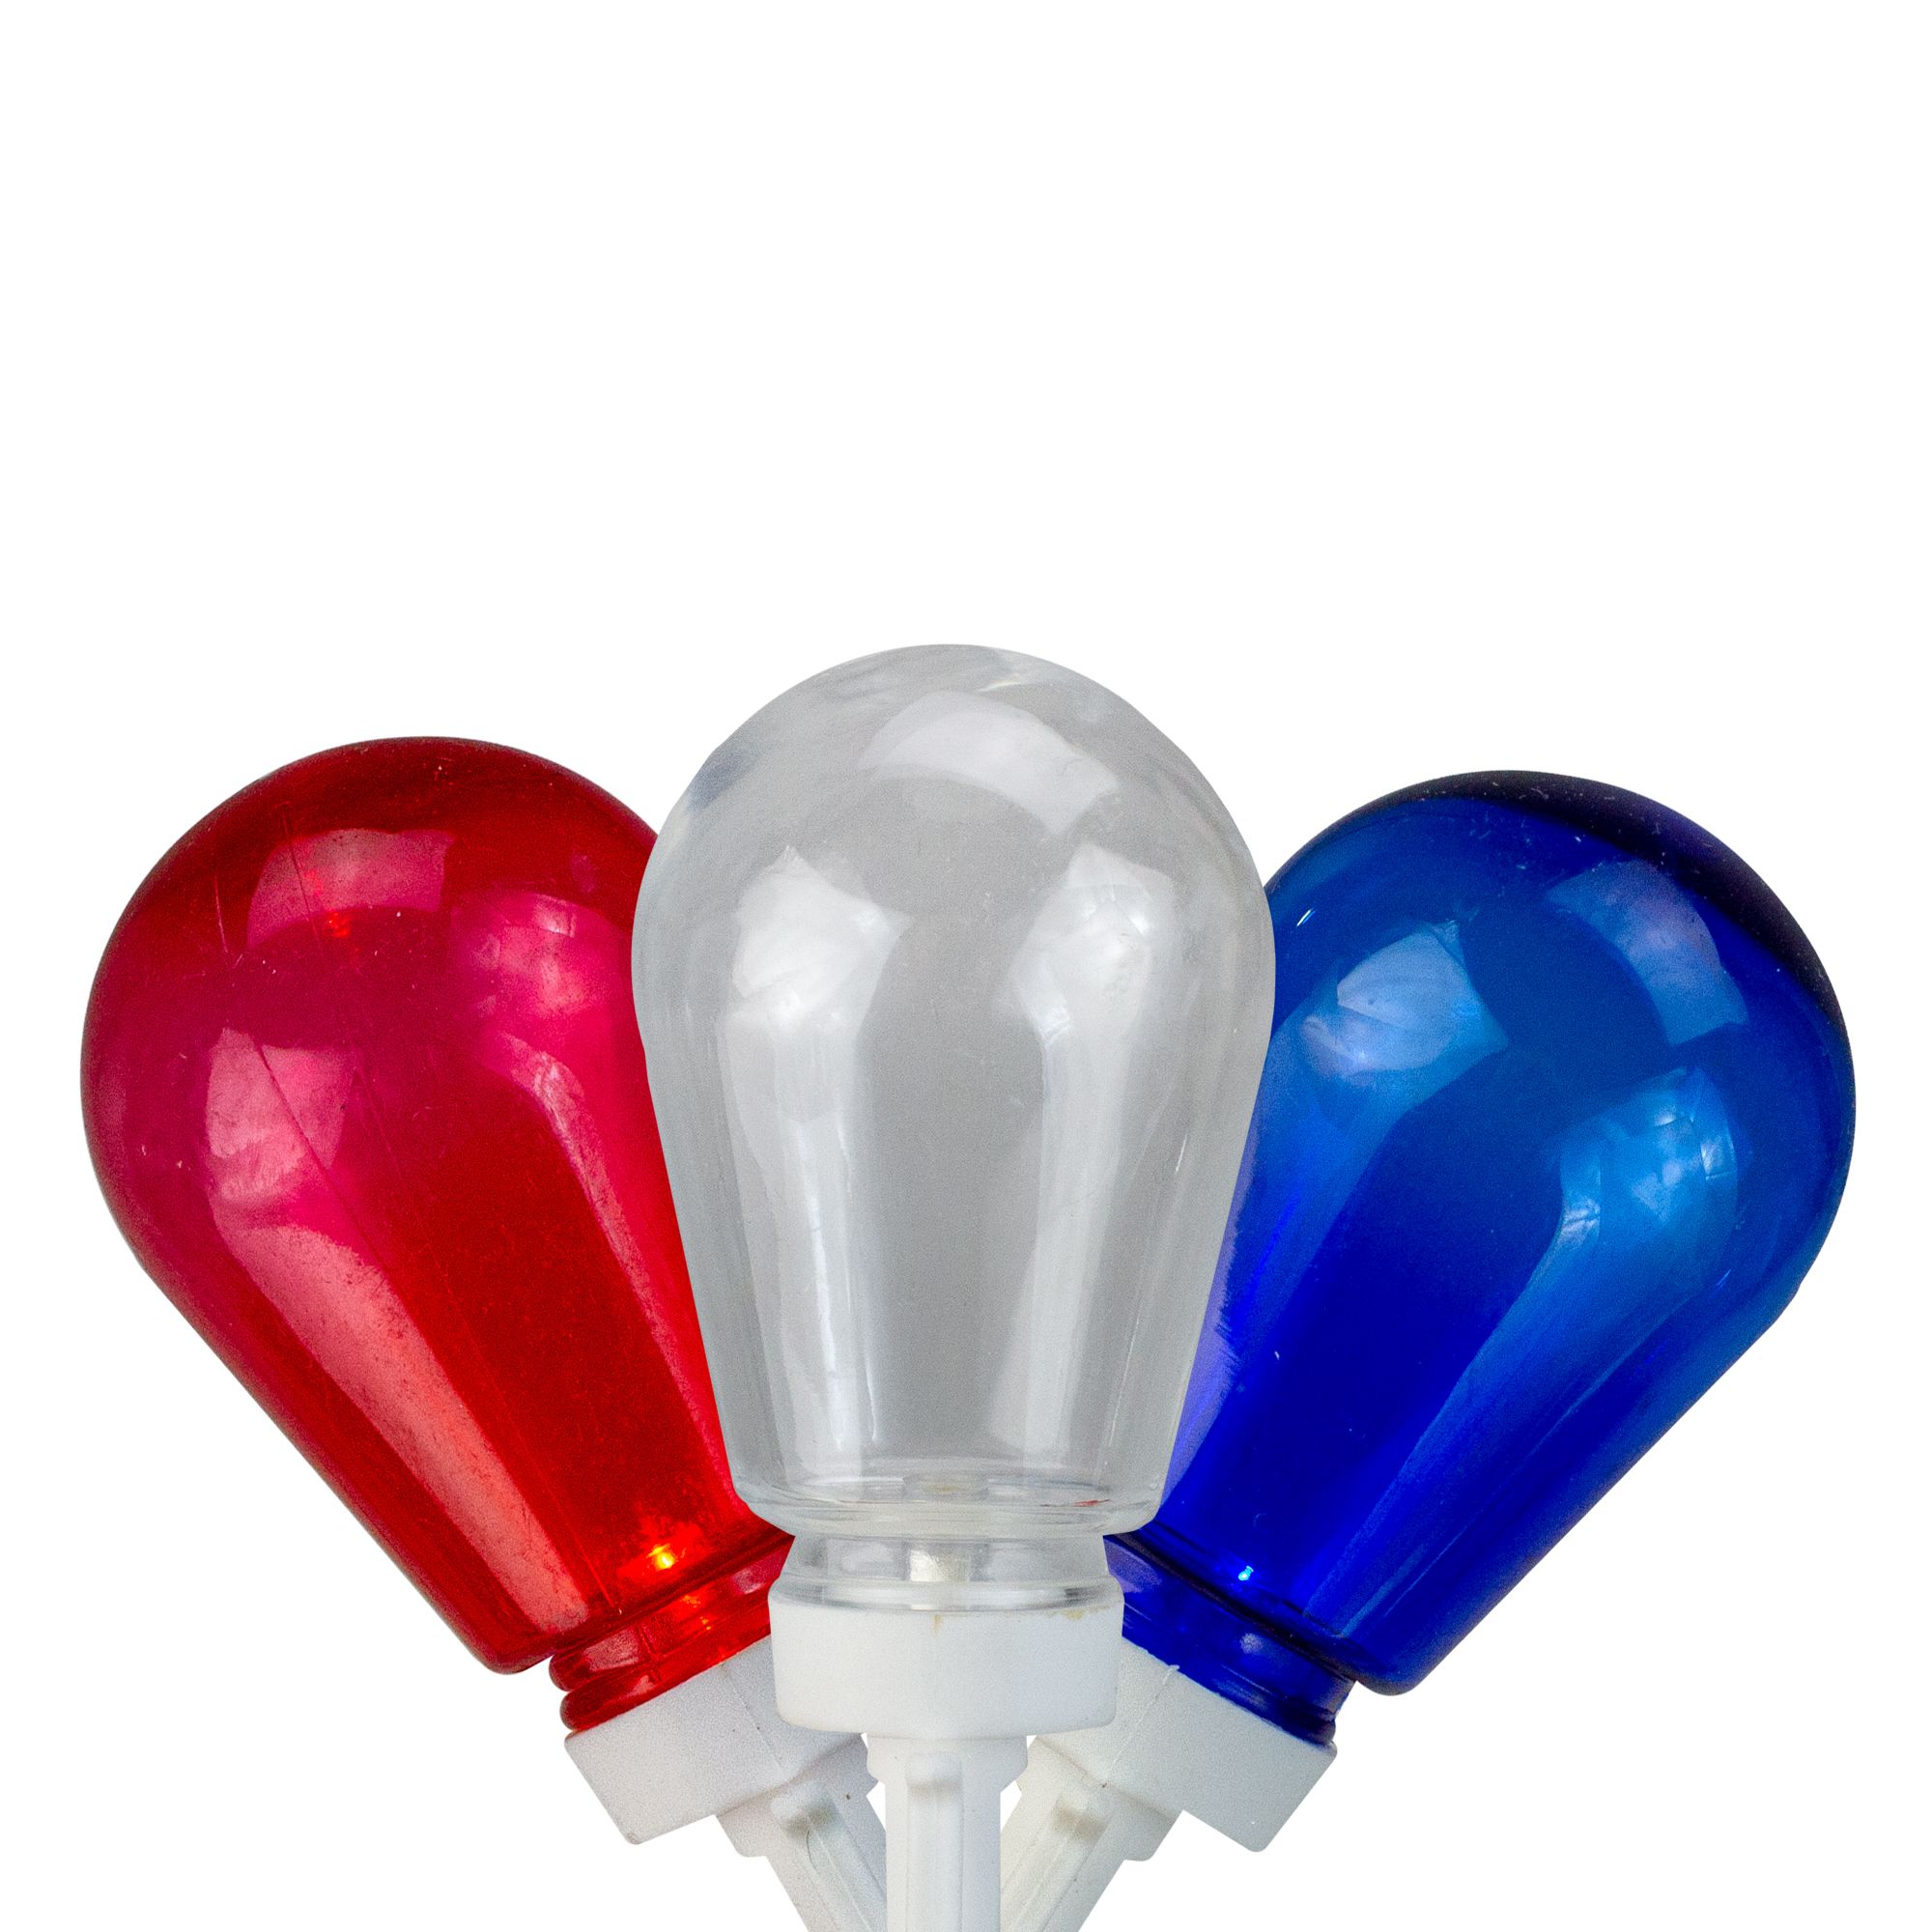 Northlight Americana 9' Patriotic Edison-Style Lights - Red, White and Blue